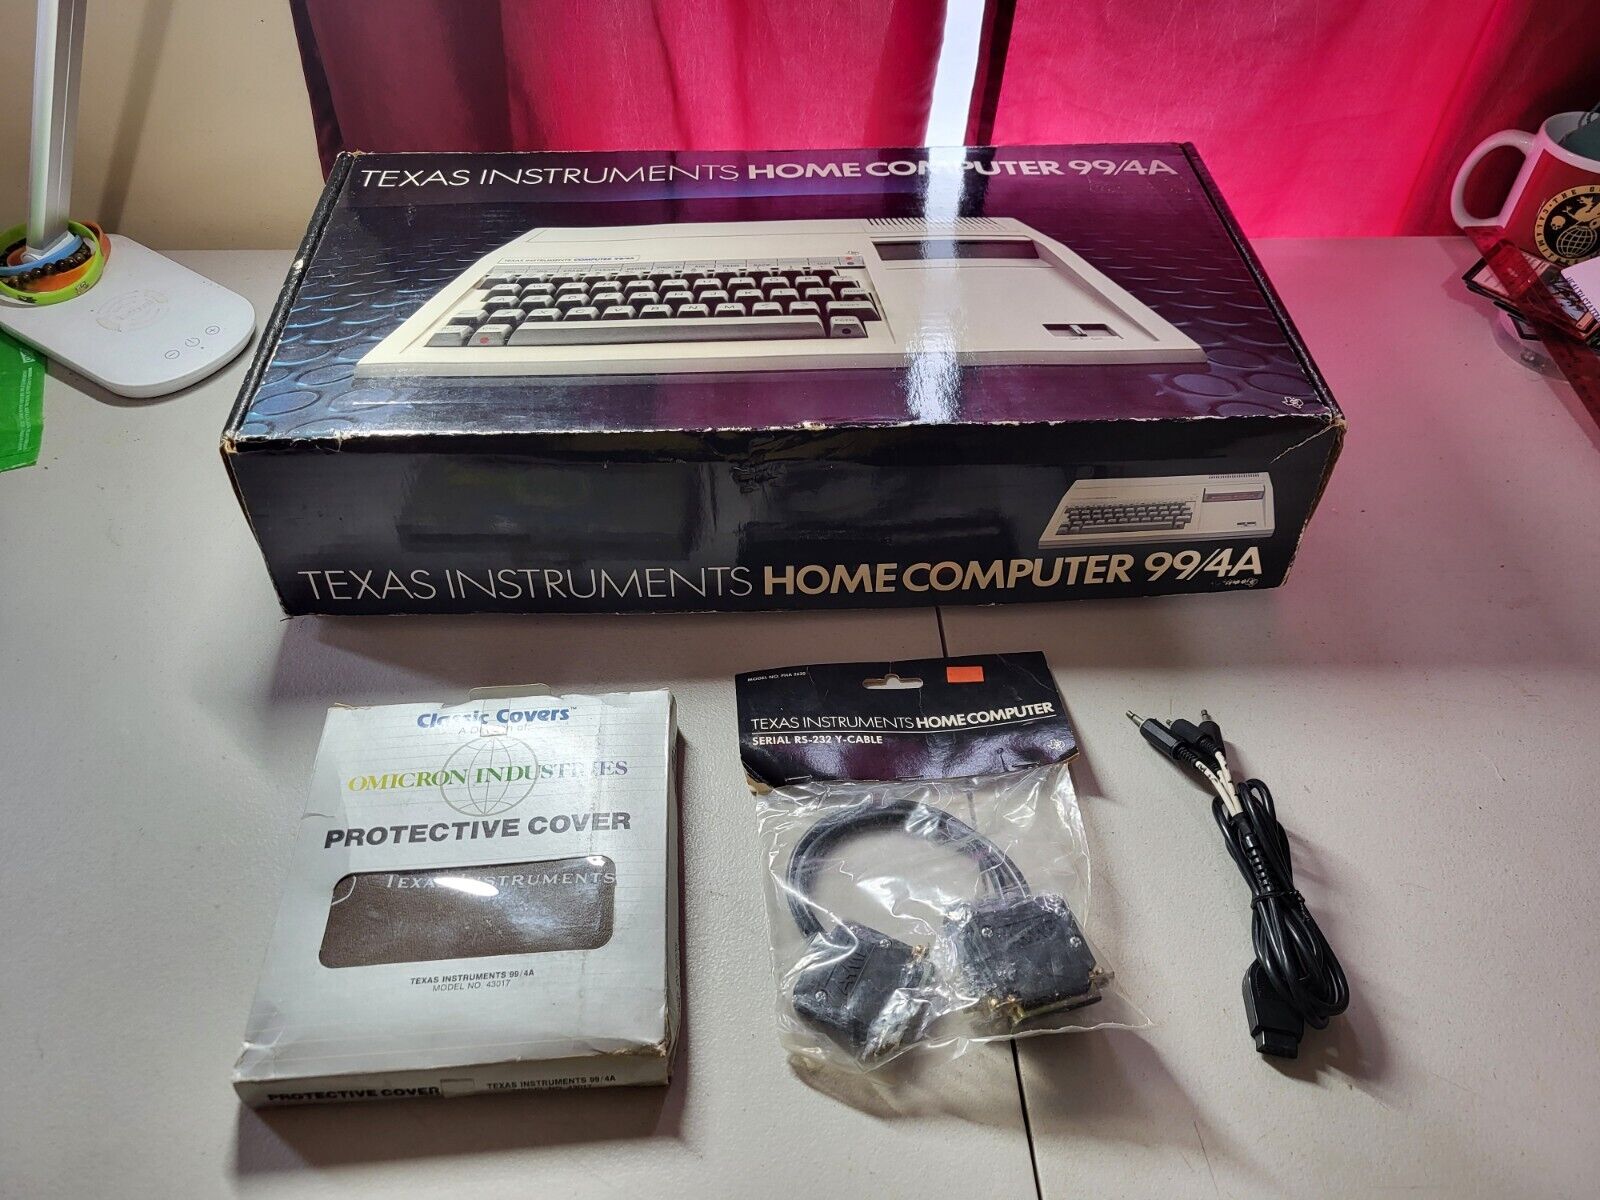 NOS Vintage Texas Instruments TI99/4A Home Computer, New Old Stock Open Box #1